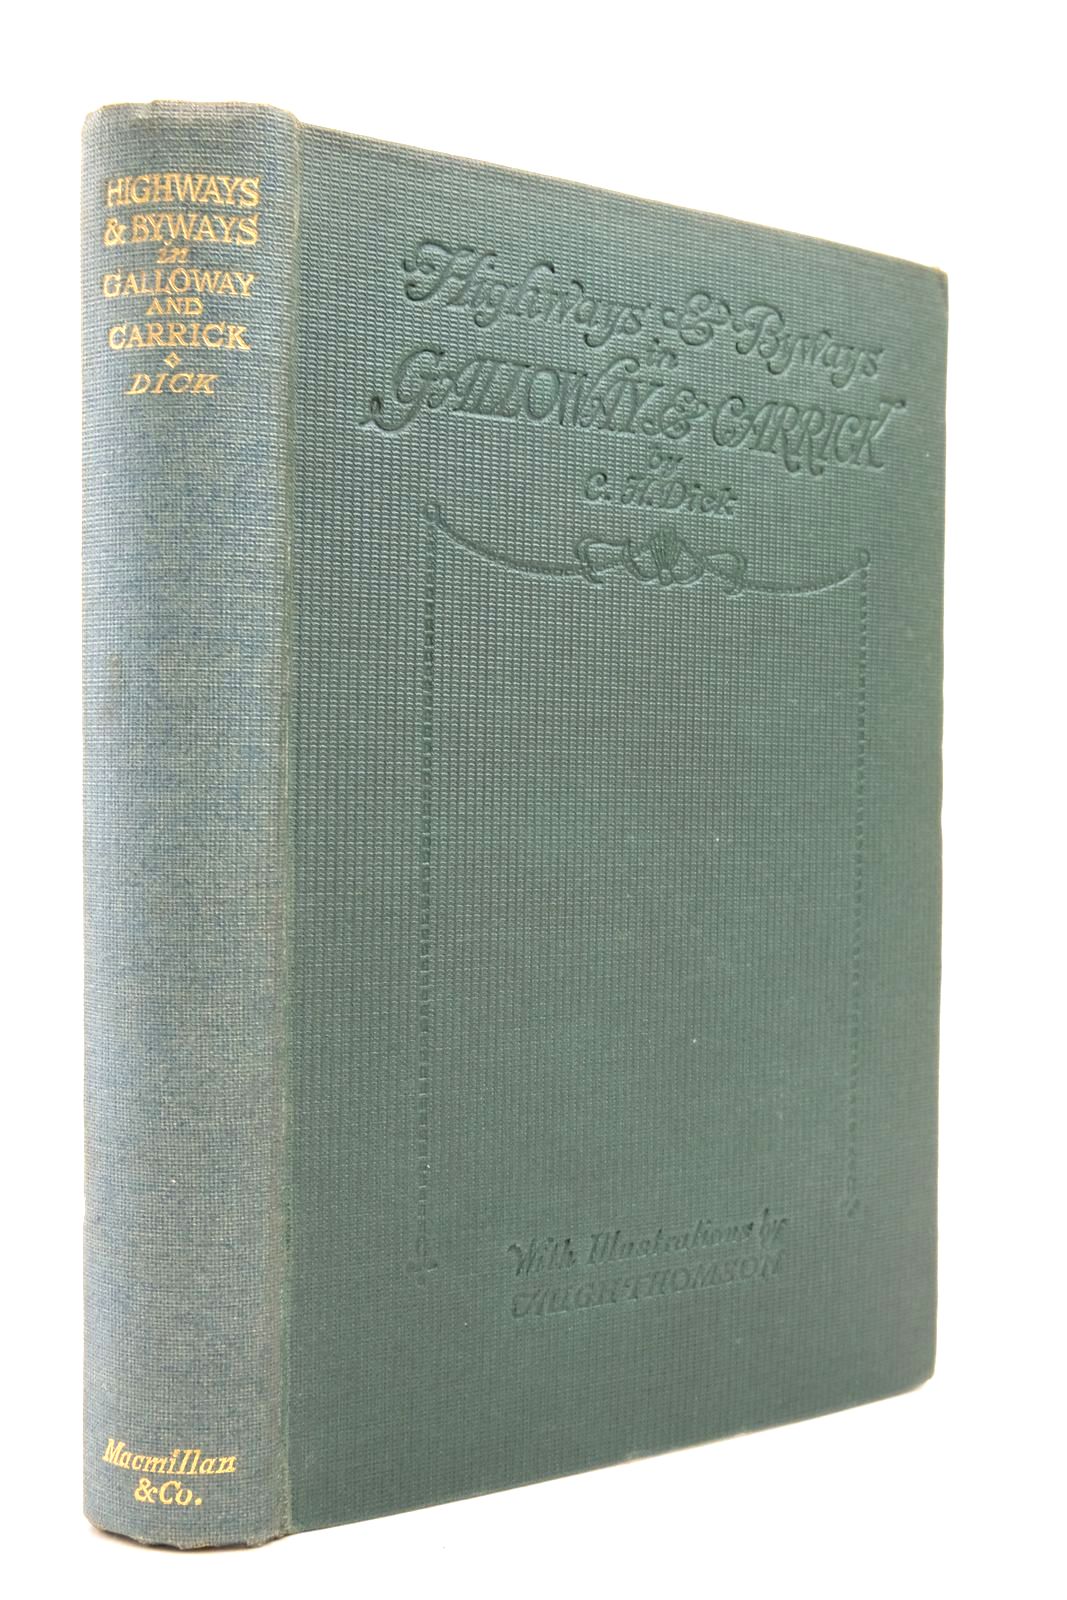 Photo of HIGHWAYS AND BYWAYS IN GALLOWAY AND CARRICK written by Dick, C.H. illustrated by Thomson, Hugh published by Macmillan &amp; Co. Ltd. (STOCK CODE: 2137631)  for sale by Stella & Rose's Books